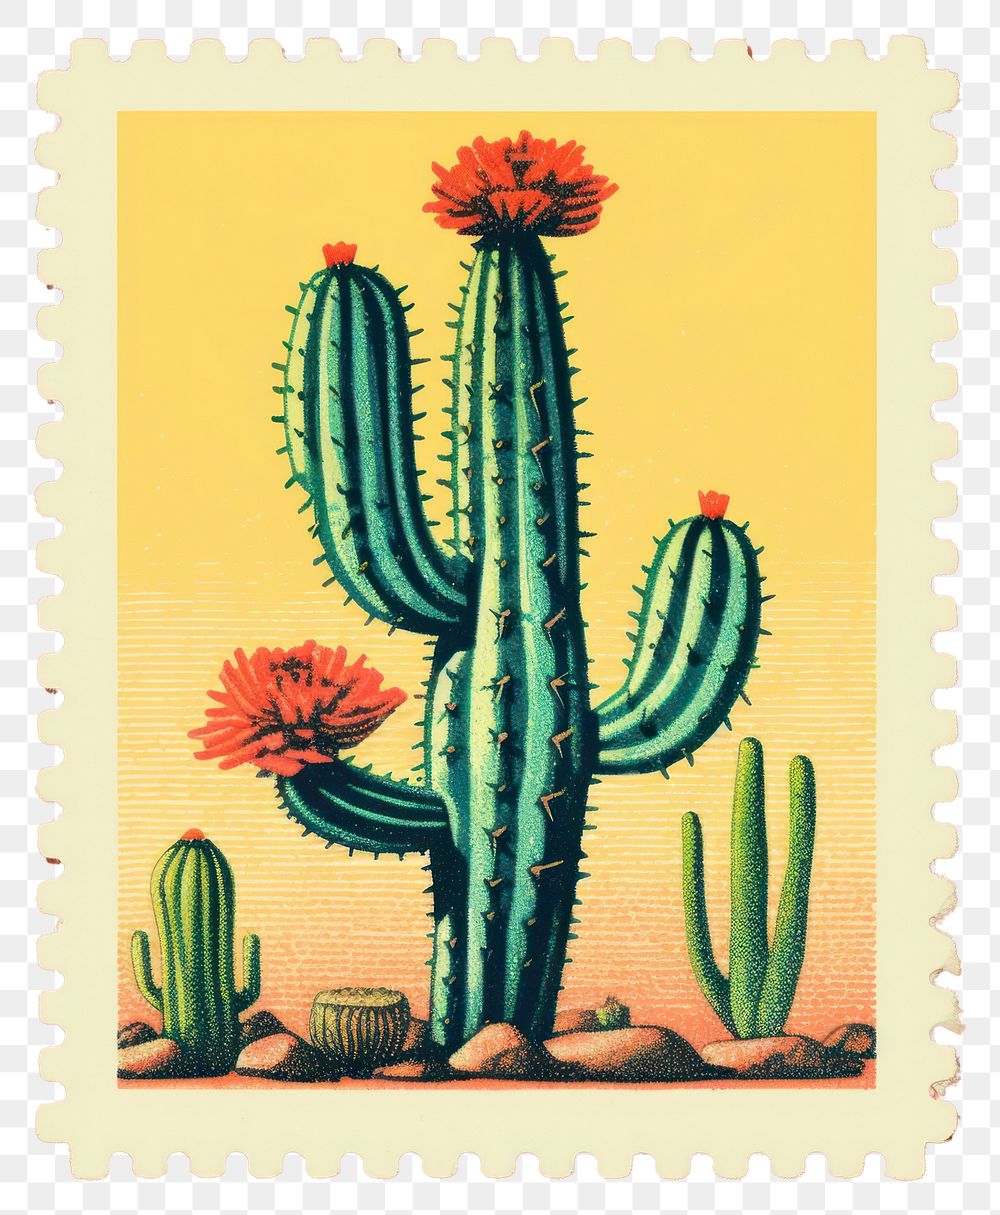 PNG Cactus Risograph style cactus plant postage stamp.